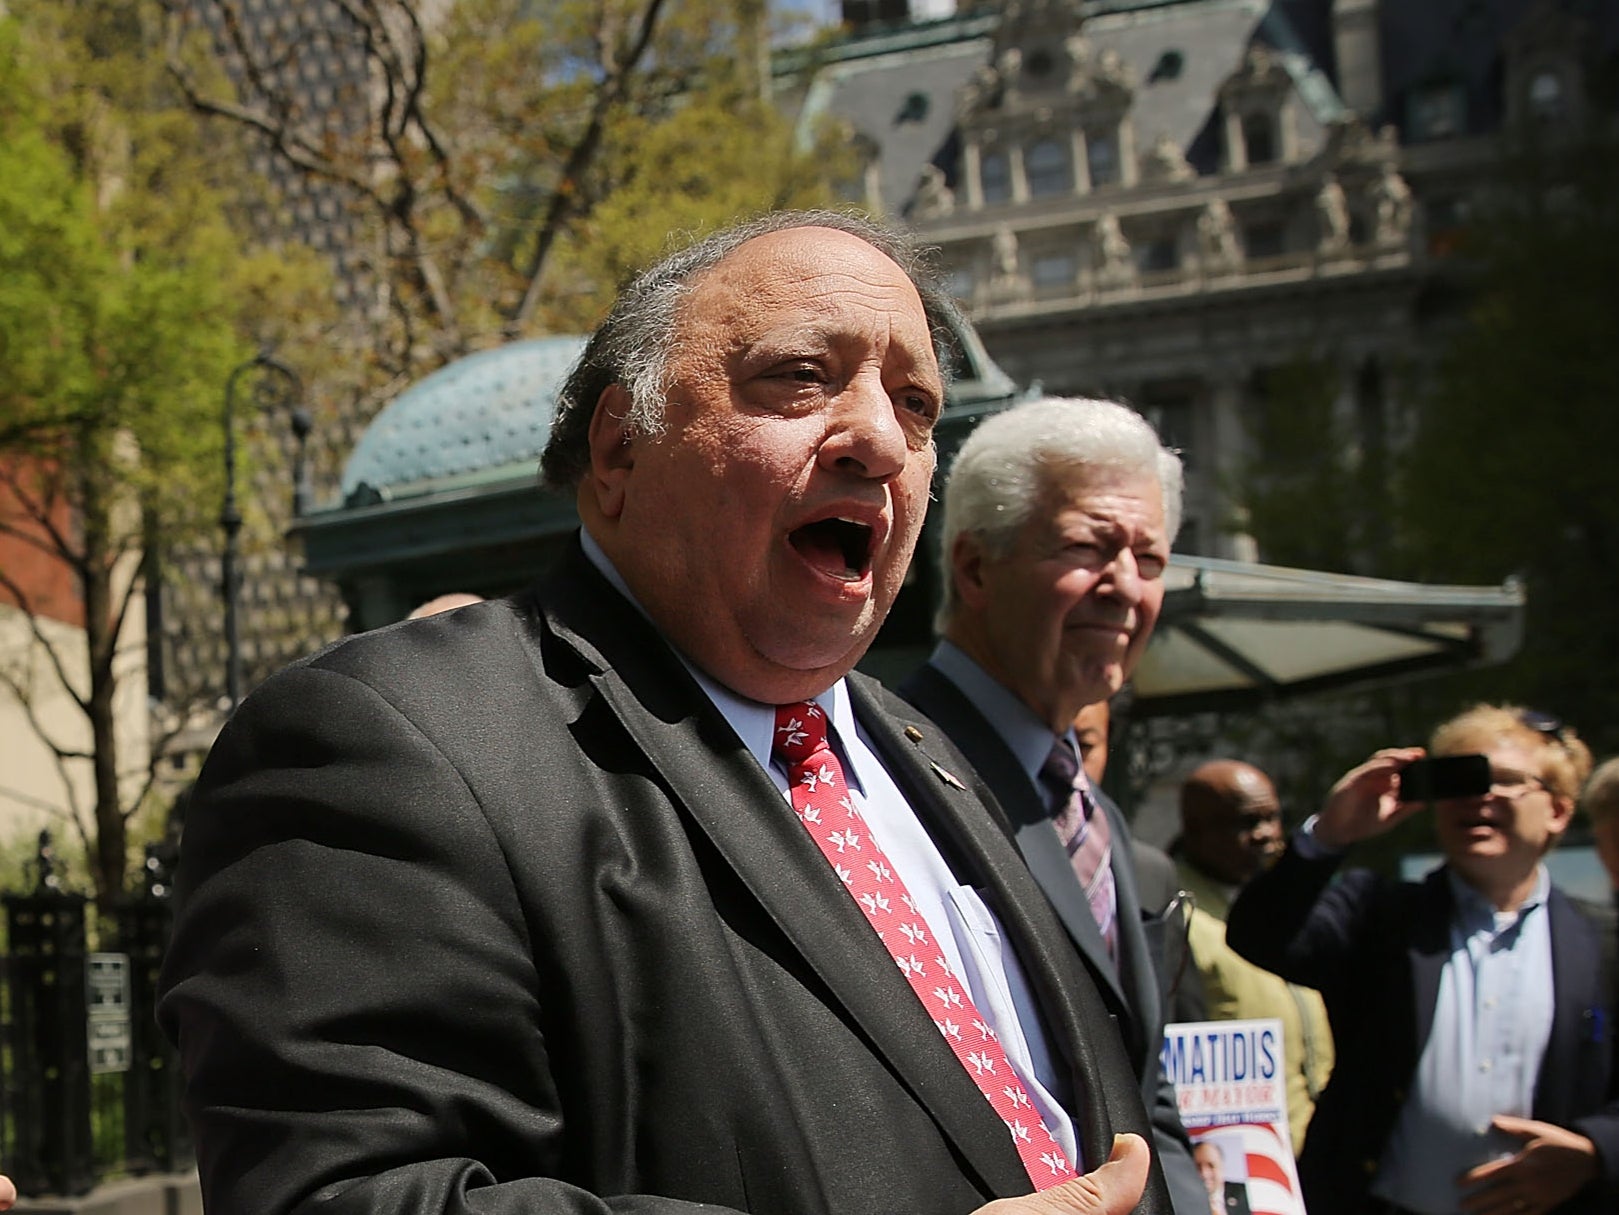 File. John Catsimatidis is a Greek-born businessman who owns Gristedes Foods